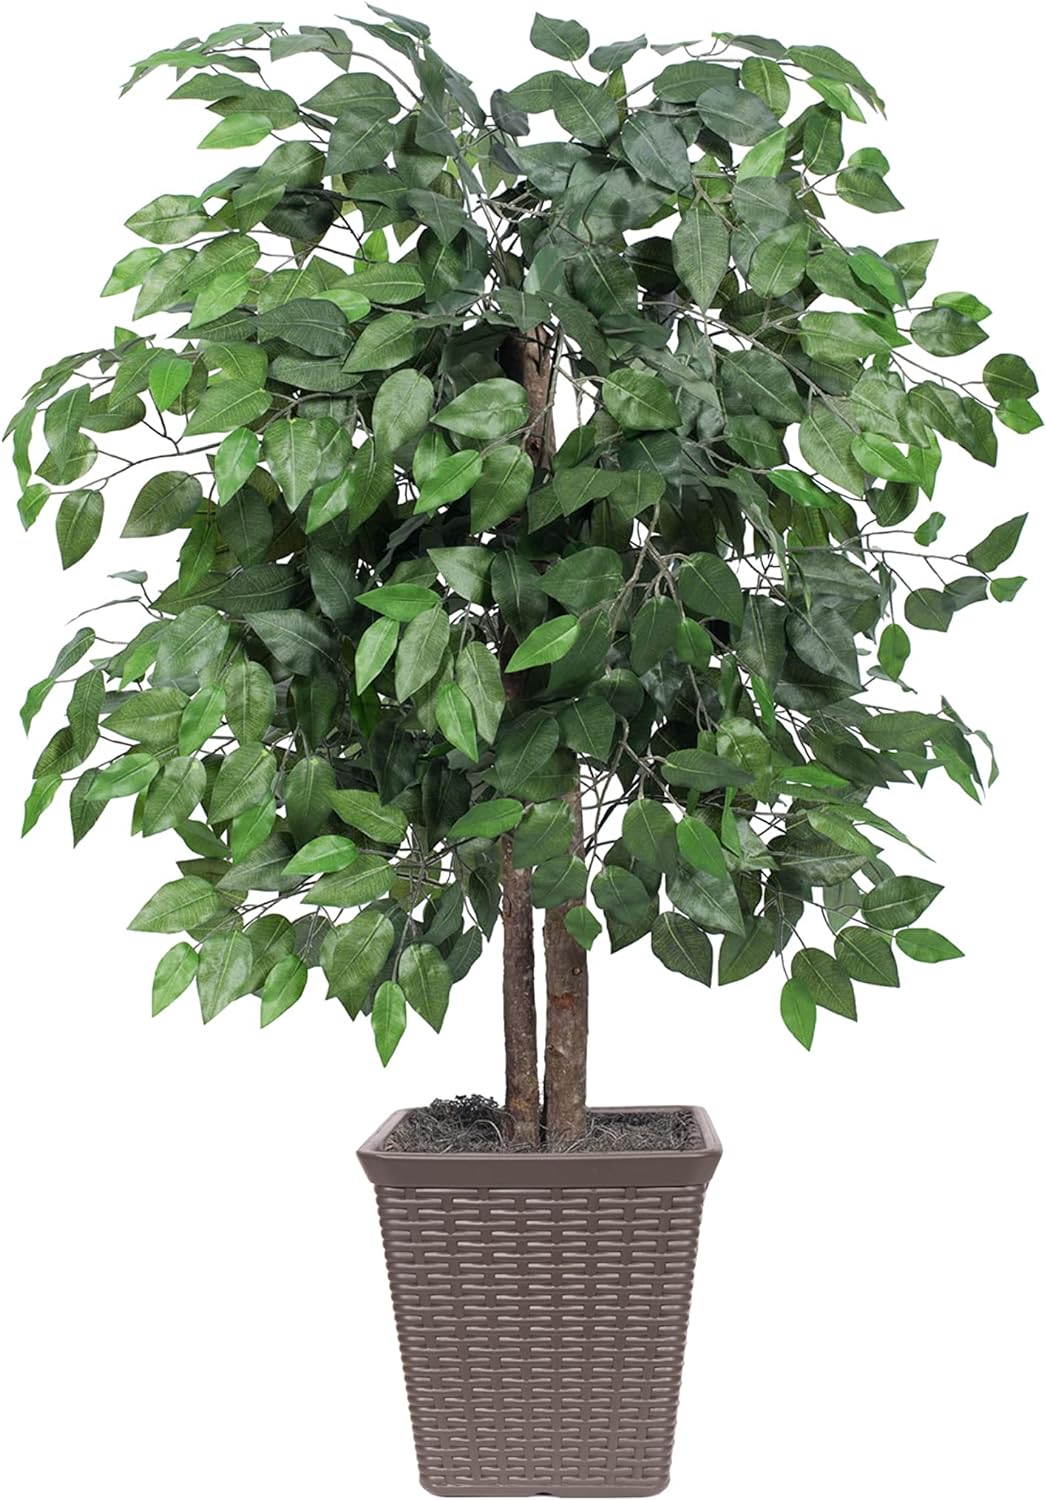 This ficus tree is perfect for the space in my living room! It was packaged well and arrived on time. I had searched quite a few stores for a plant like this but wasn't satisfied with how real the other ones looked. I am very happy with this one and would purchase again.